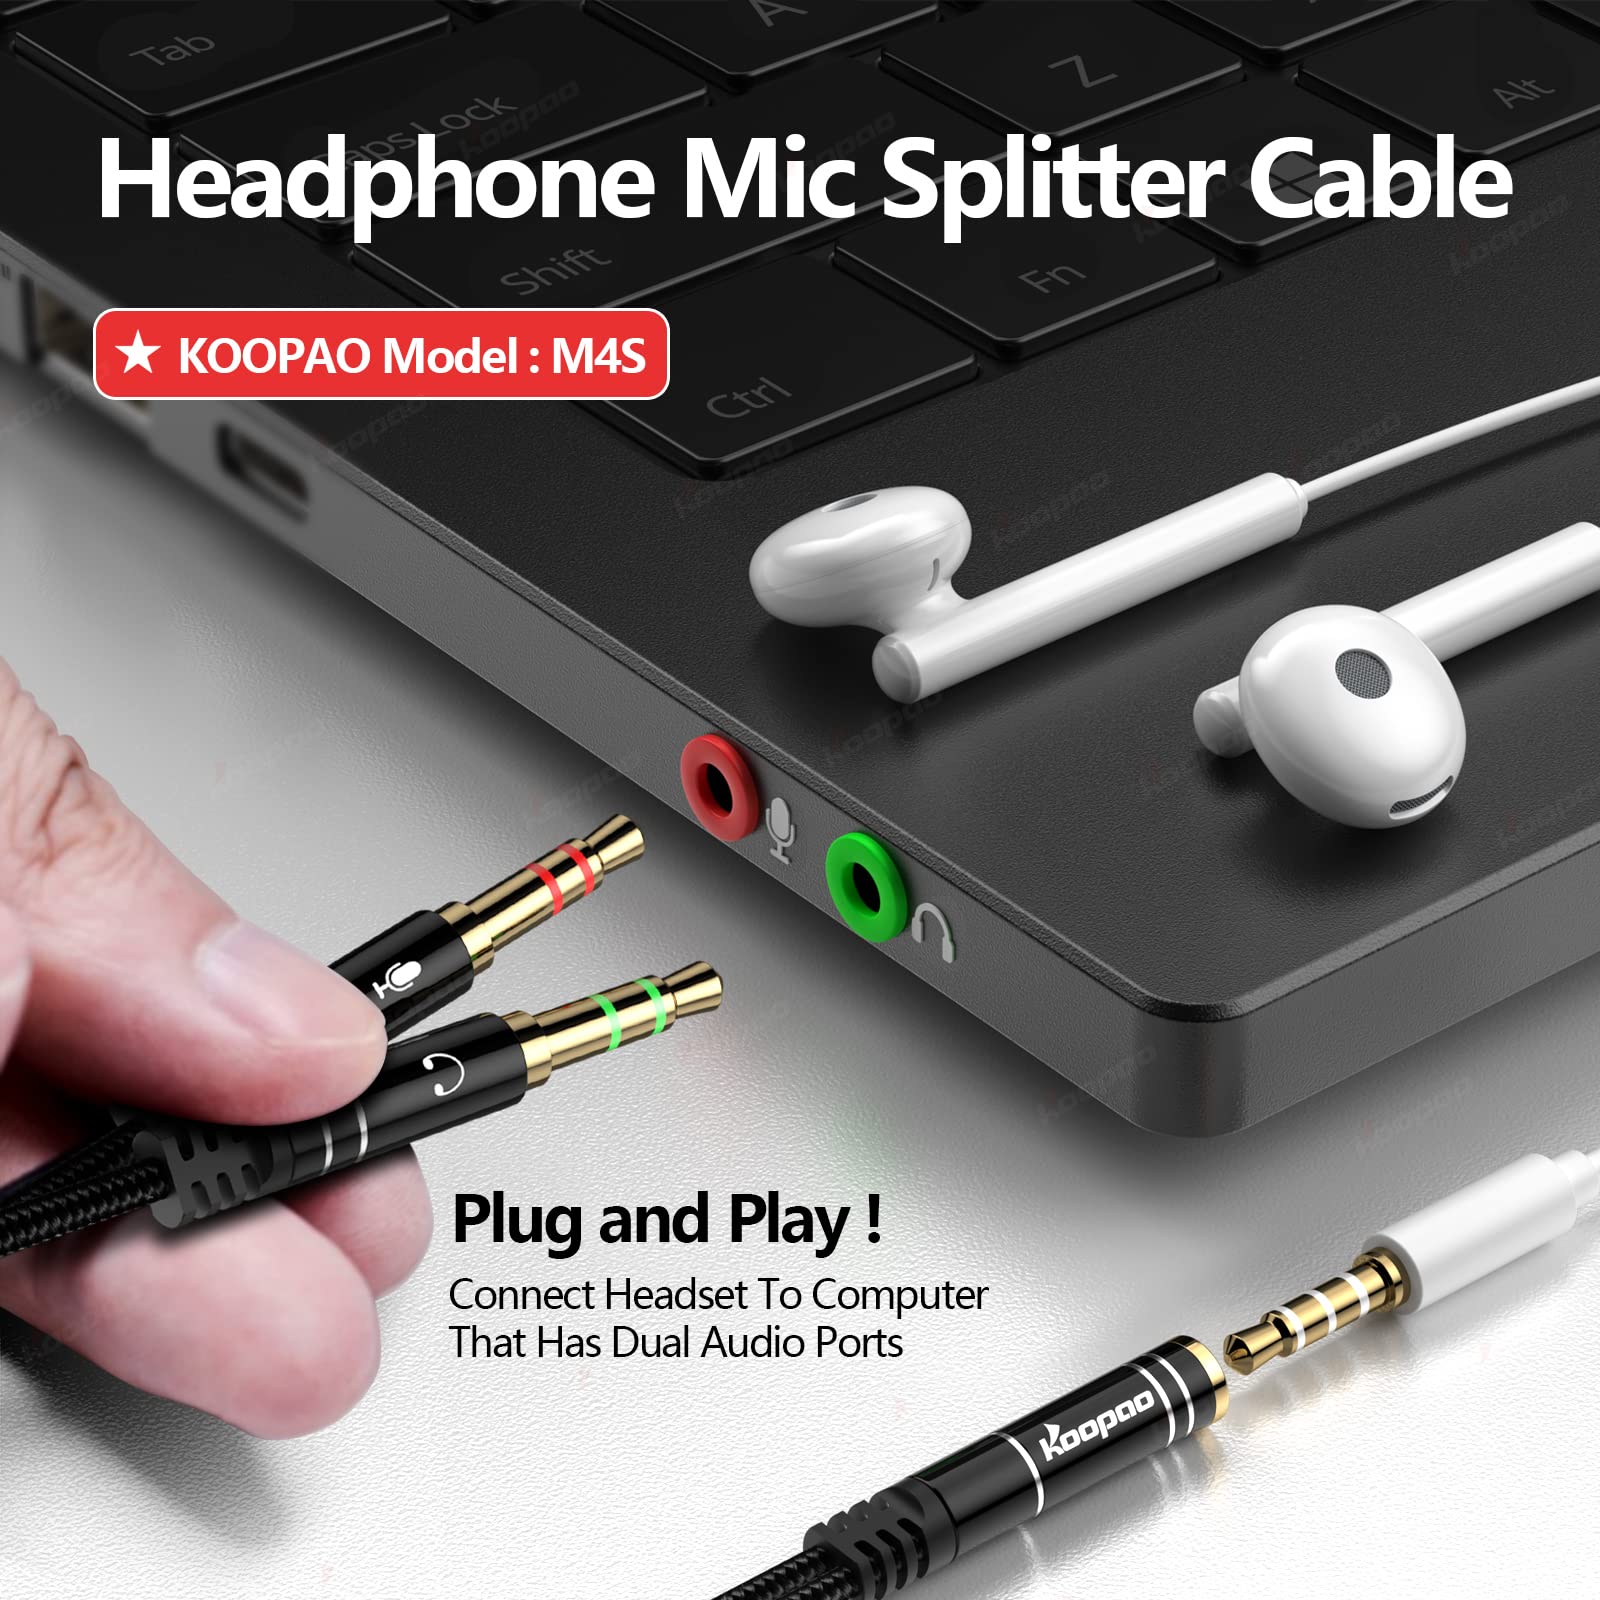 Headphone 3.5mm Splitter Mic Cable for Computer, KOOPAO Headset 3.5mm Female to 2 Dual Male Microphone Audio Stereo Jack Earphones Port to Gaming Speaker PC Adapter